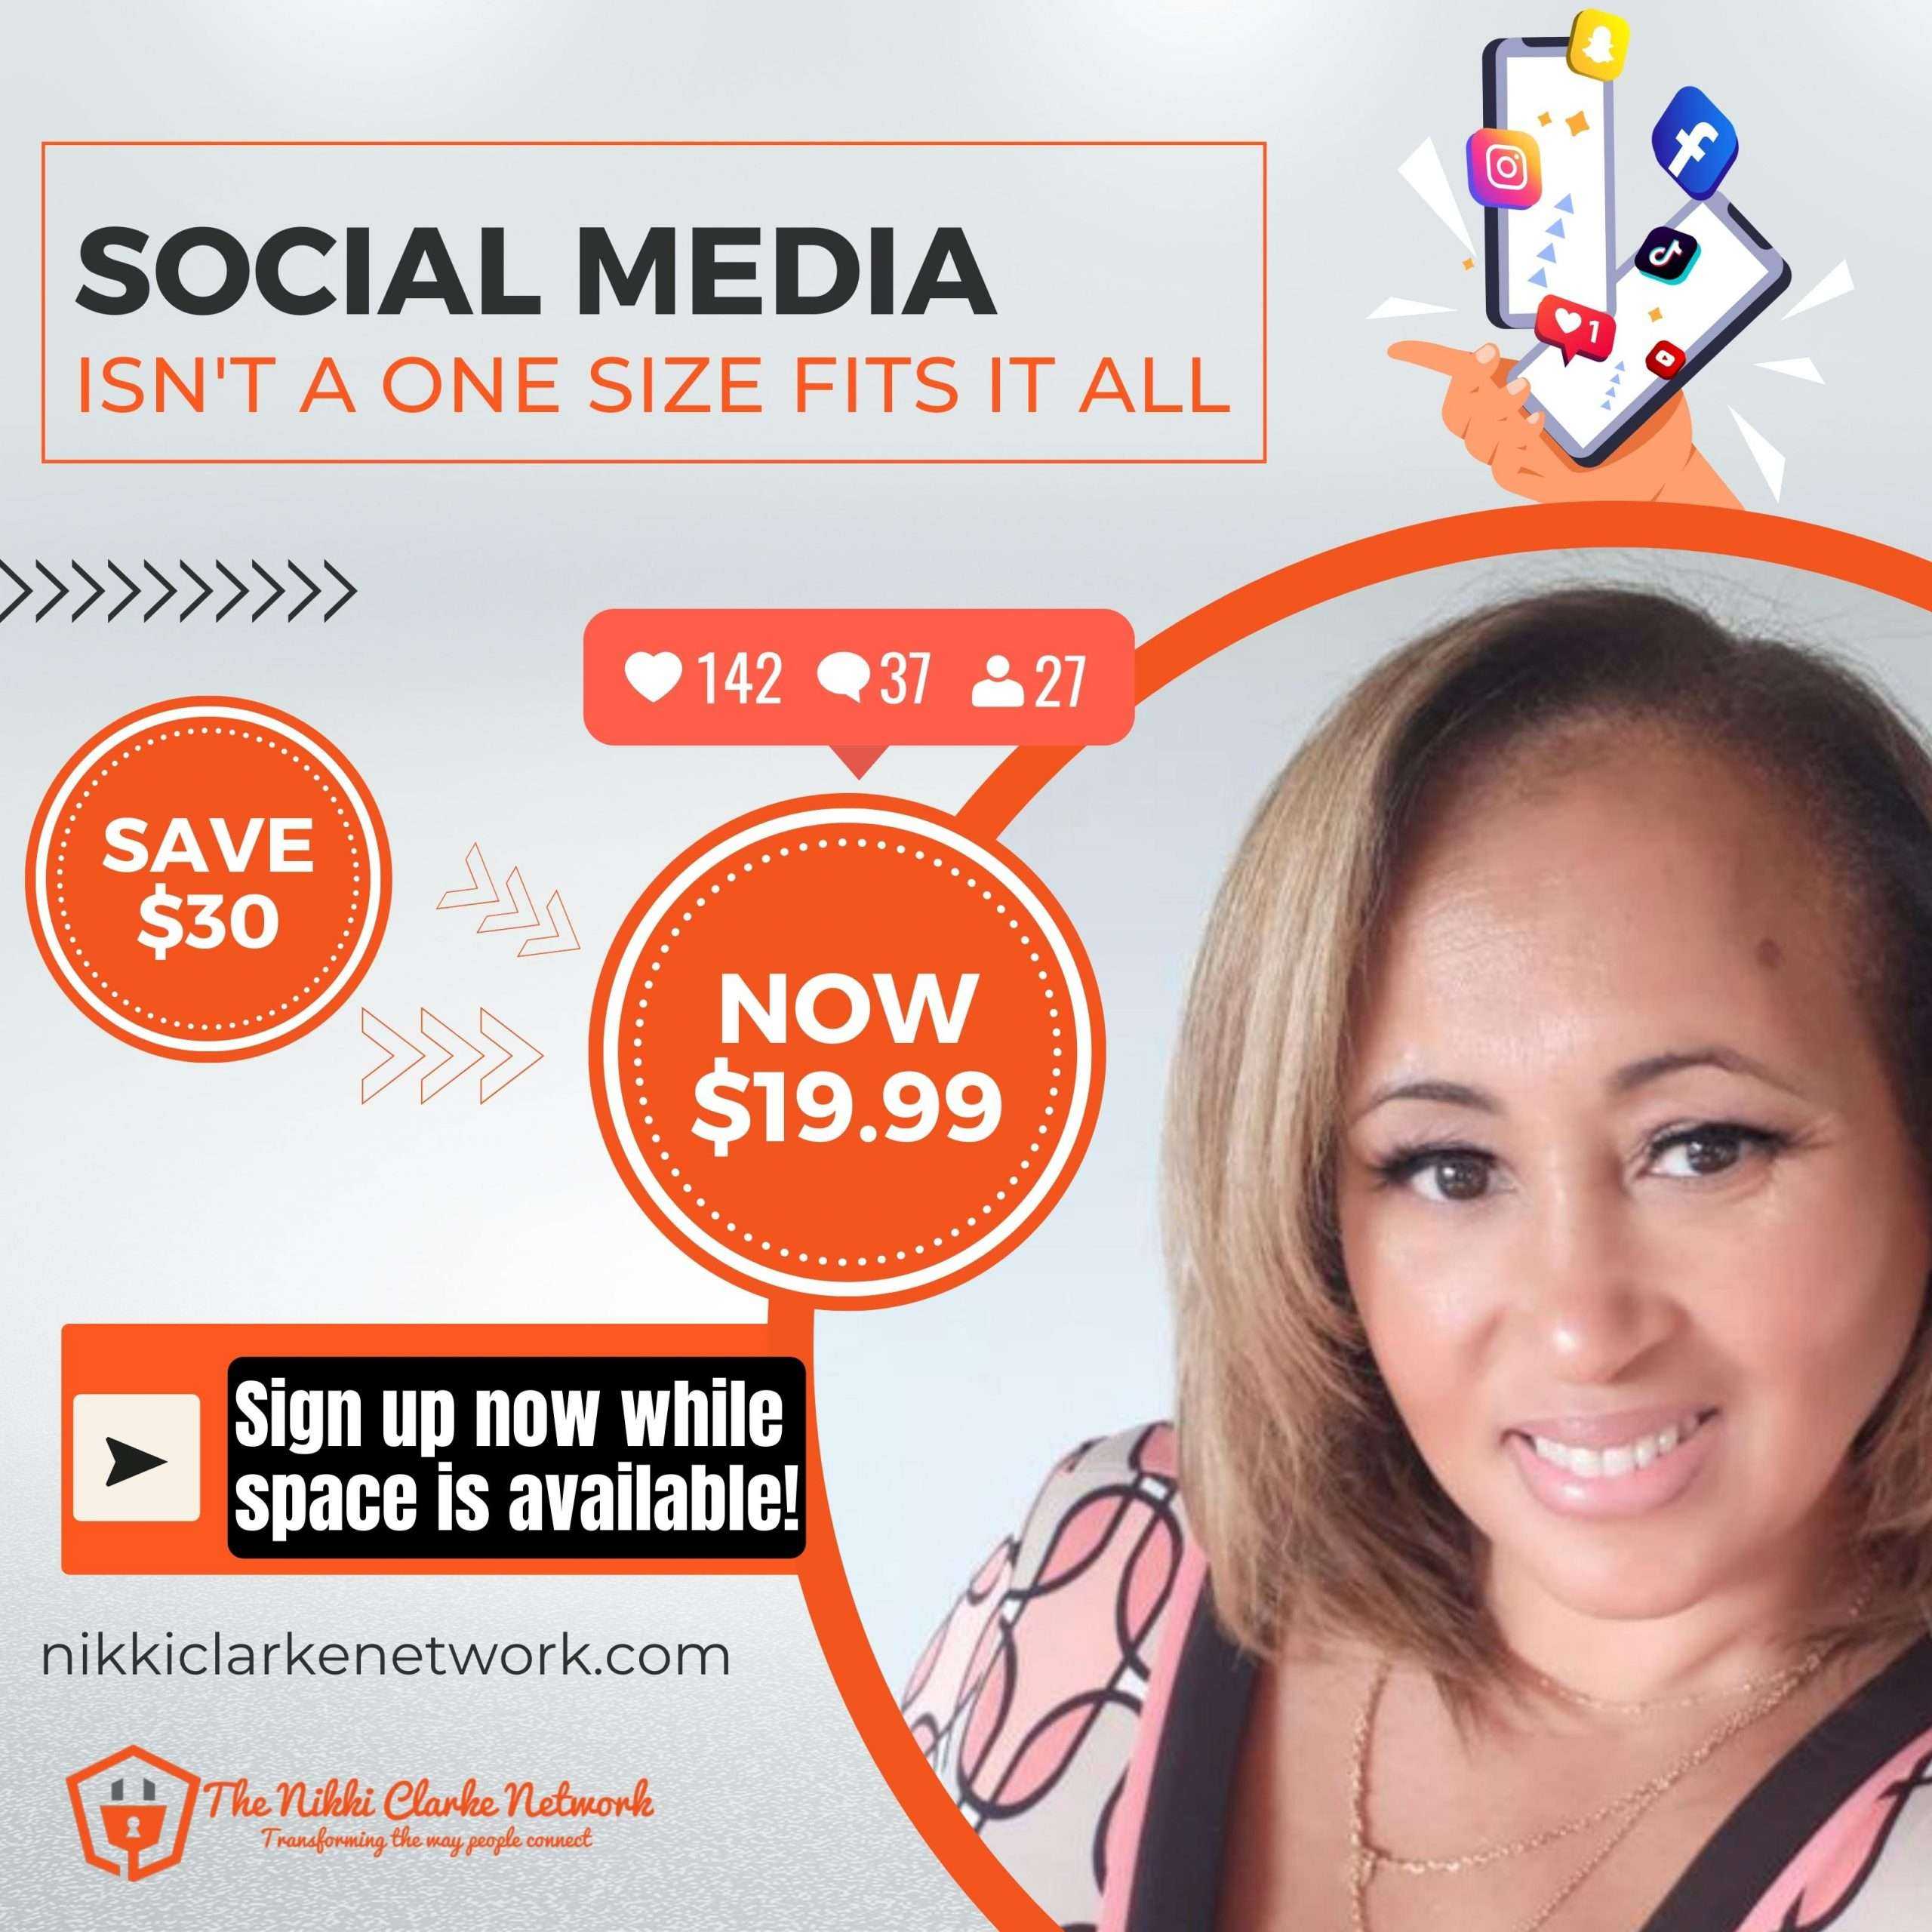 Social Media Isn’t One Size Fits All